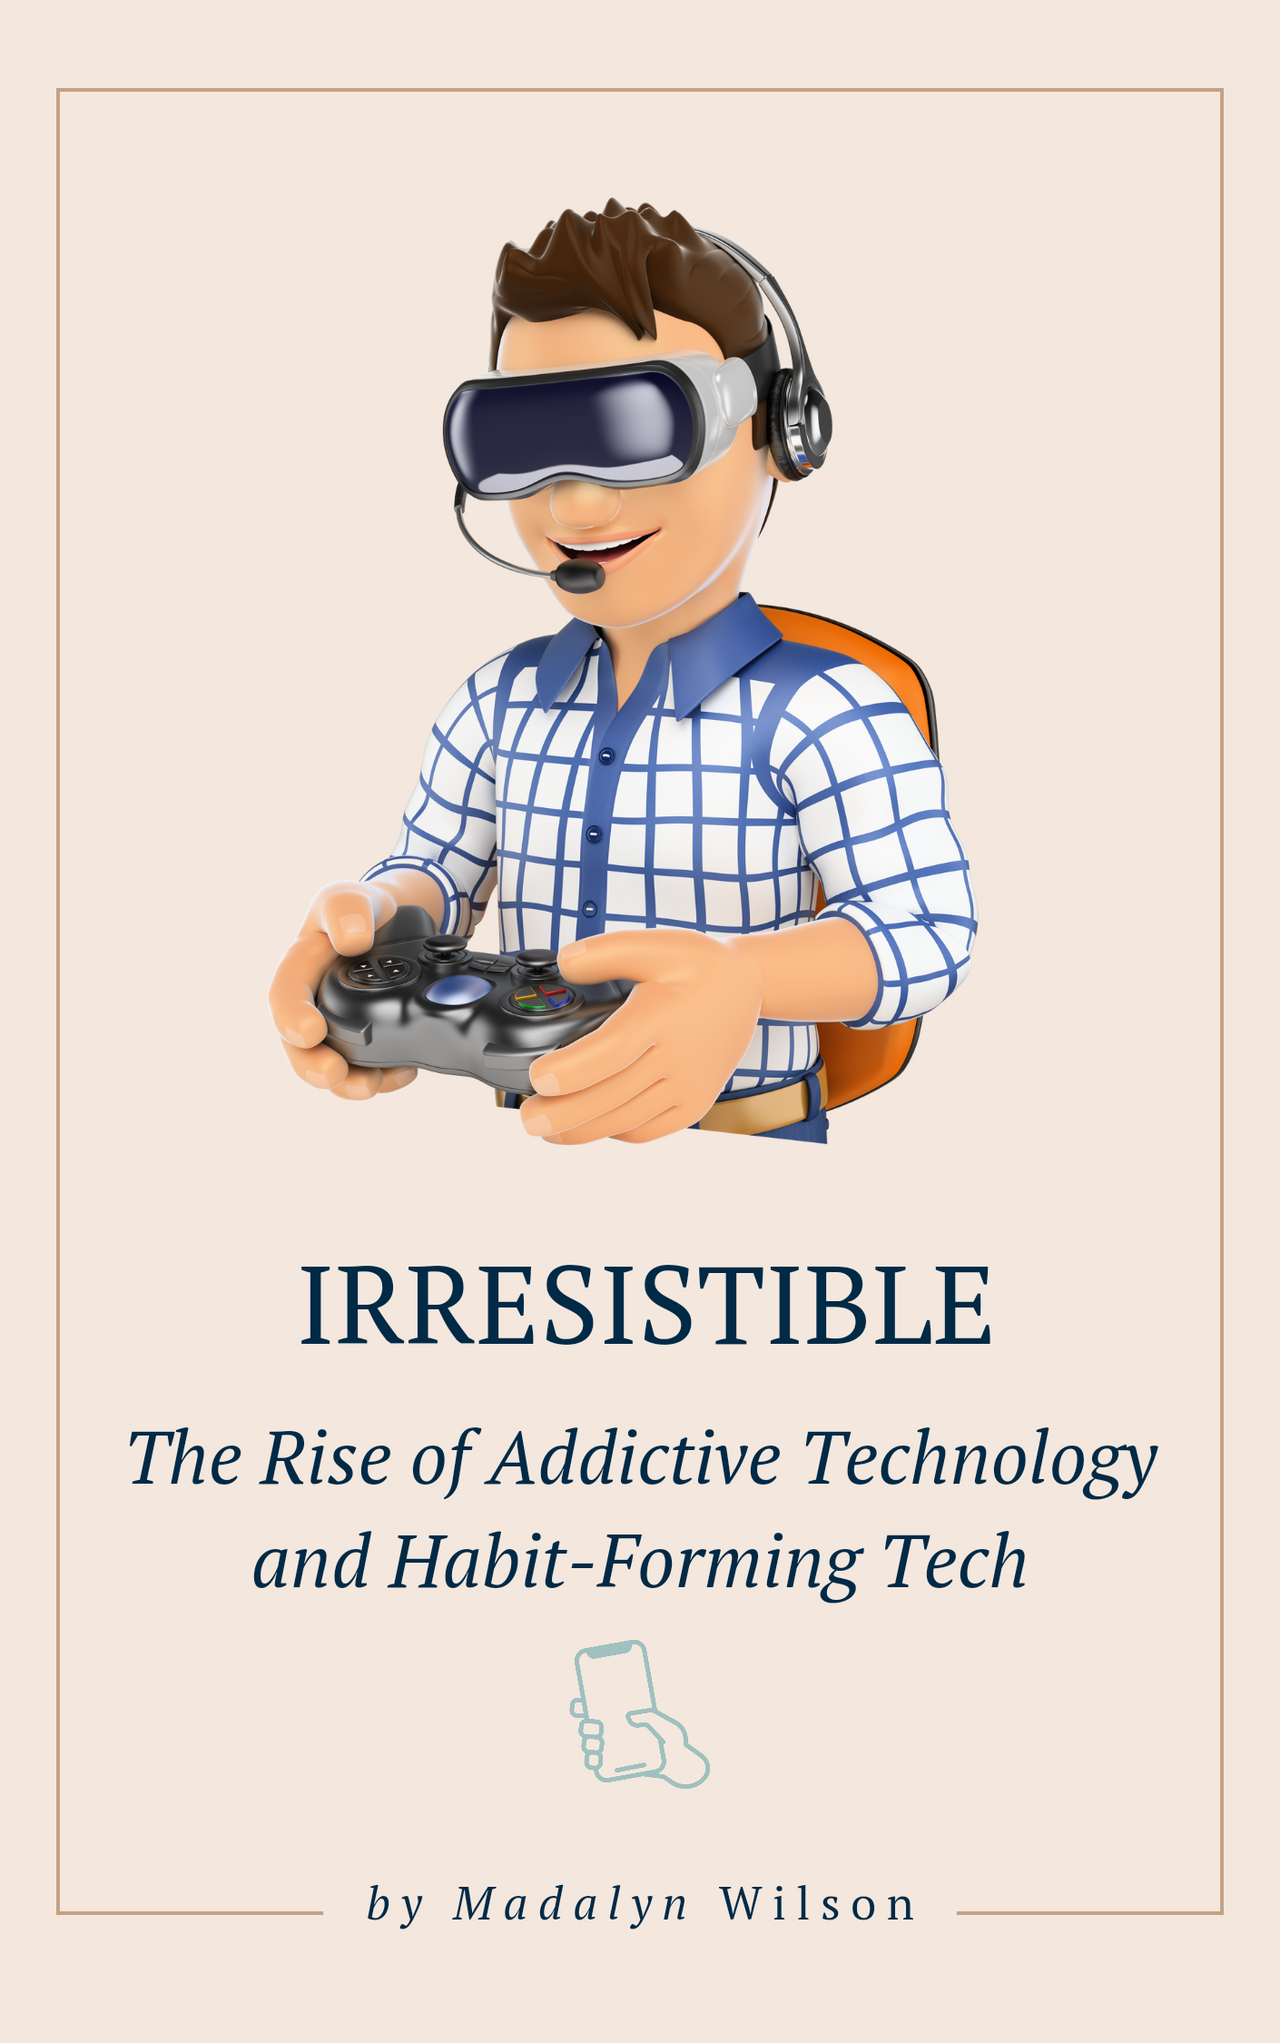 Irresistible: The Rise of Addictive Technology and Habit-Forming Tech